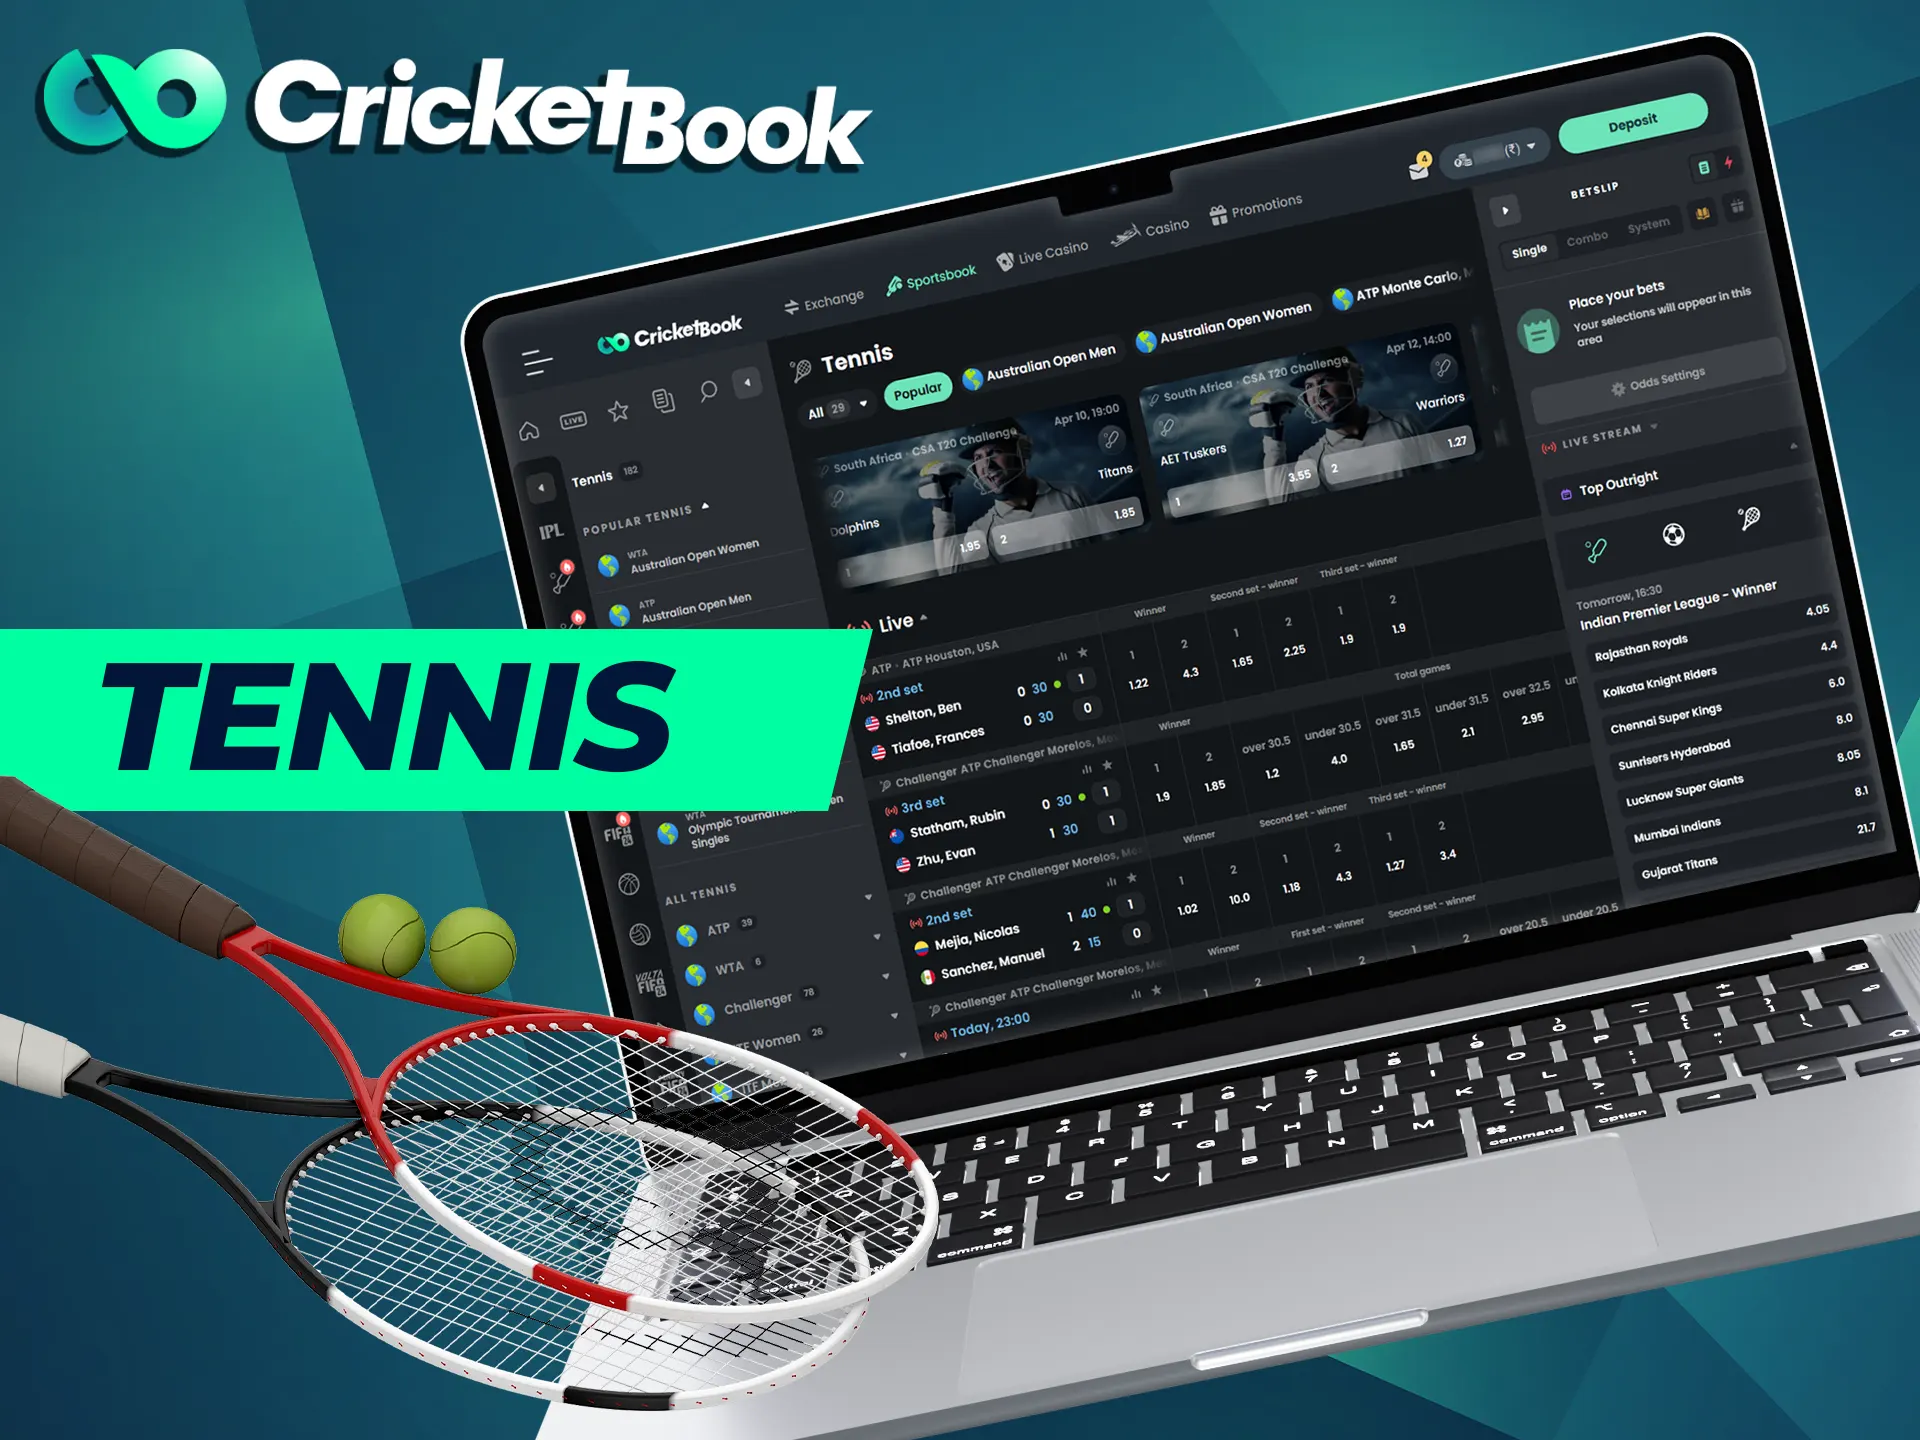 CricketBook offers betting on many sports including tennis.